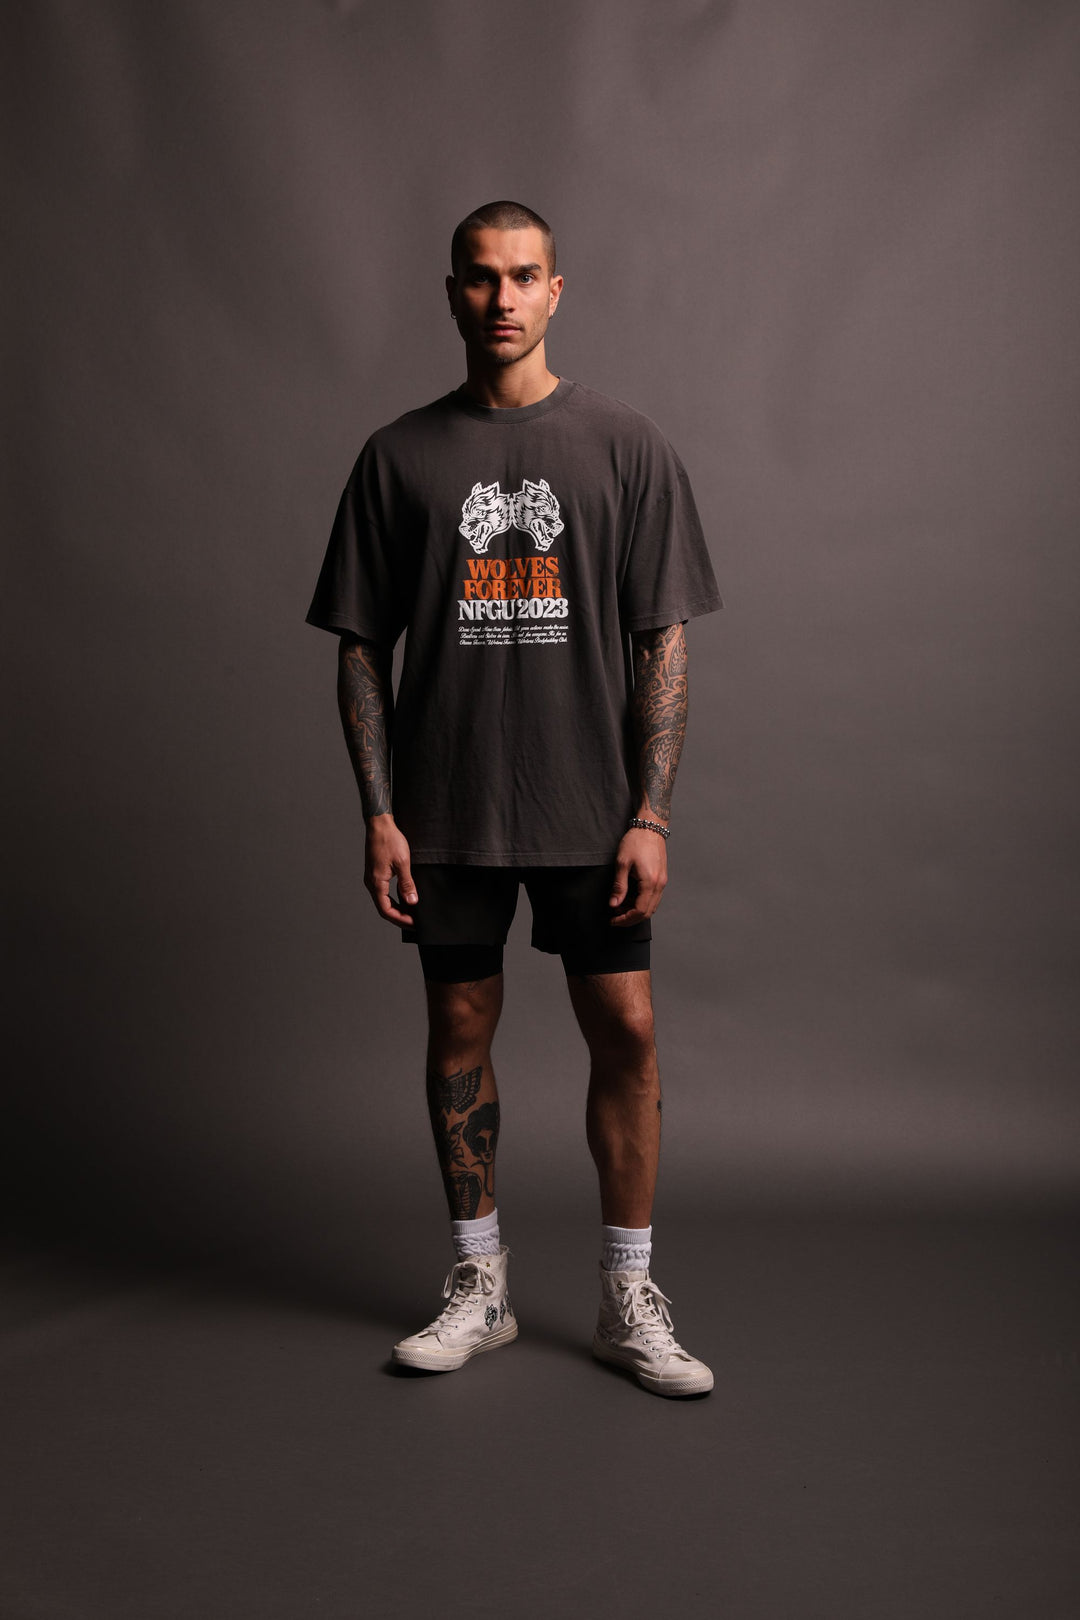 Fly Higher V2 "Premium Vintage" Oversized Tee in Wolf Gray